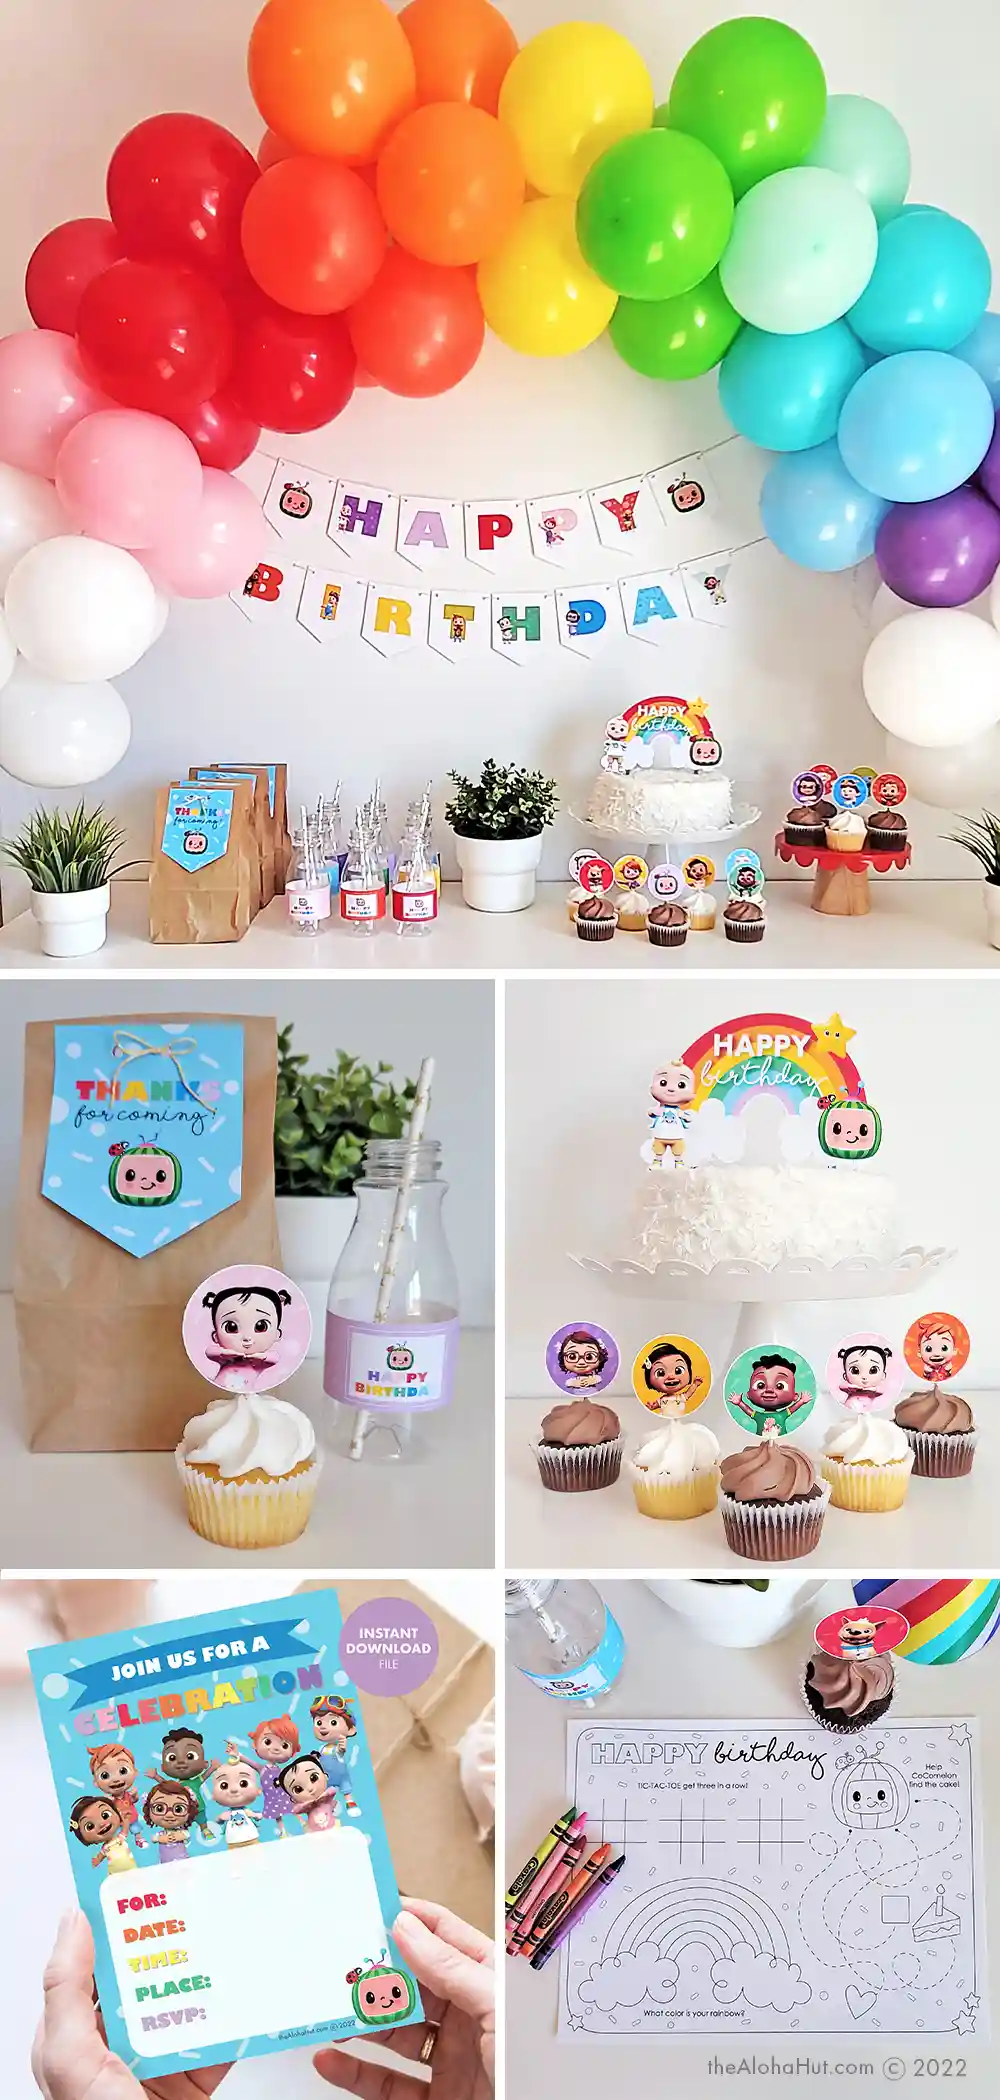 Coco melon party  2nd birthday party for girl, 1st birthday party  decorations, Boys 1st birthday cake